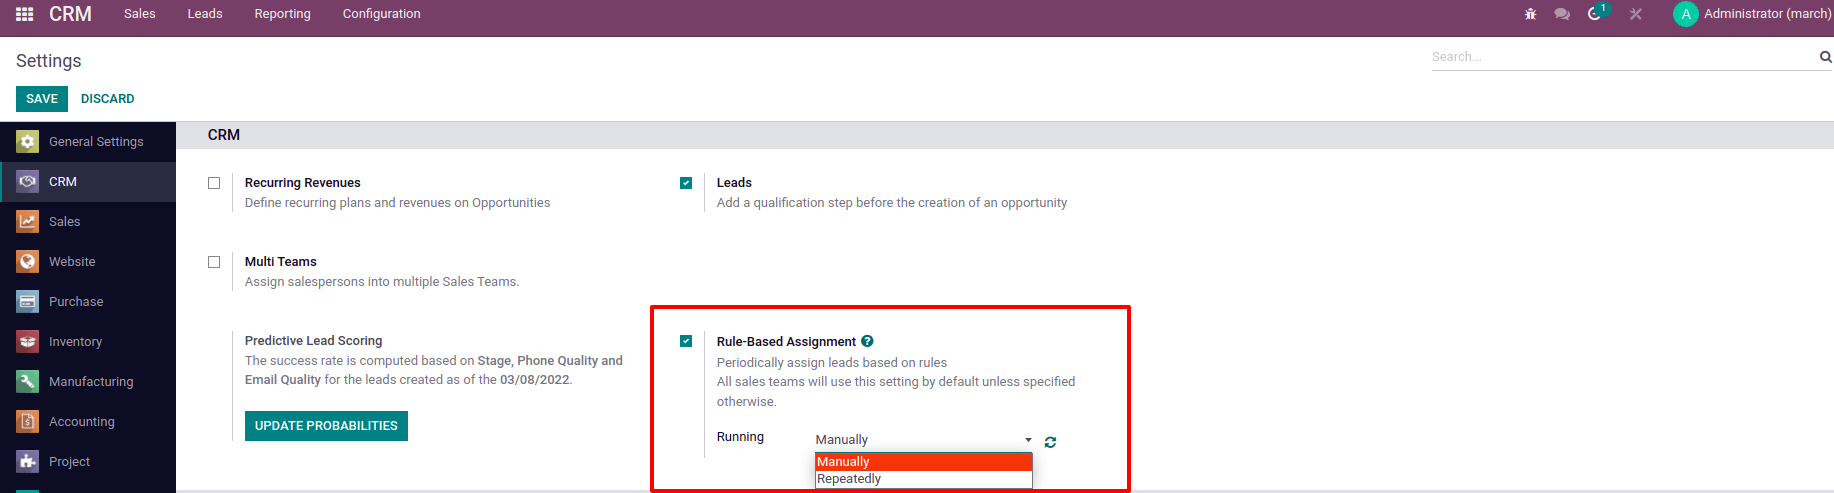 how-to-setup-rule-based-lead-assignment-with-odoo-15-crm-cybrosys